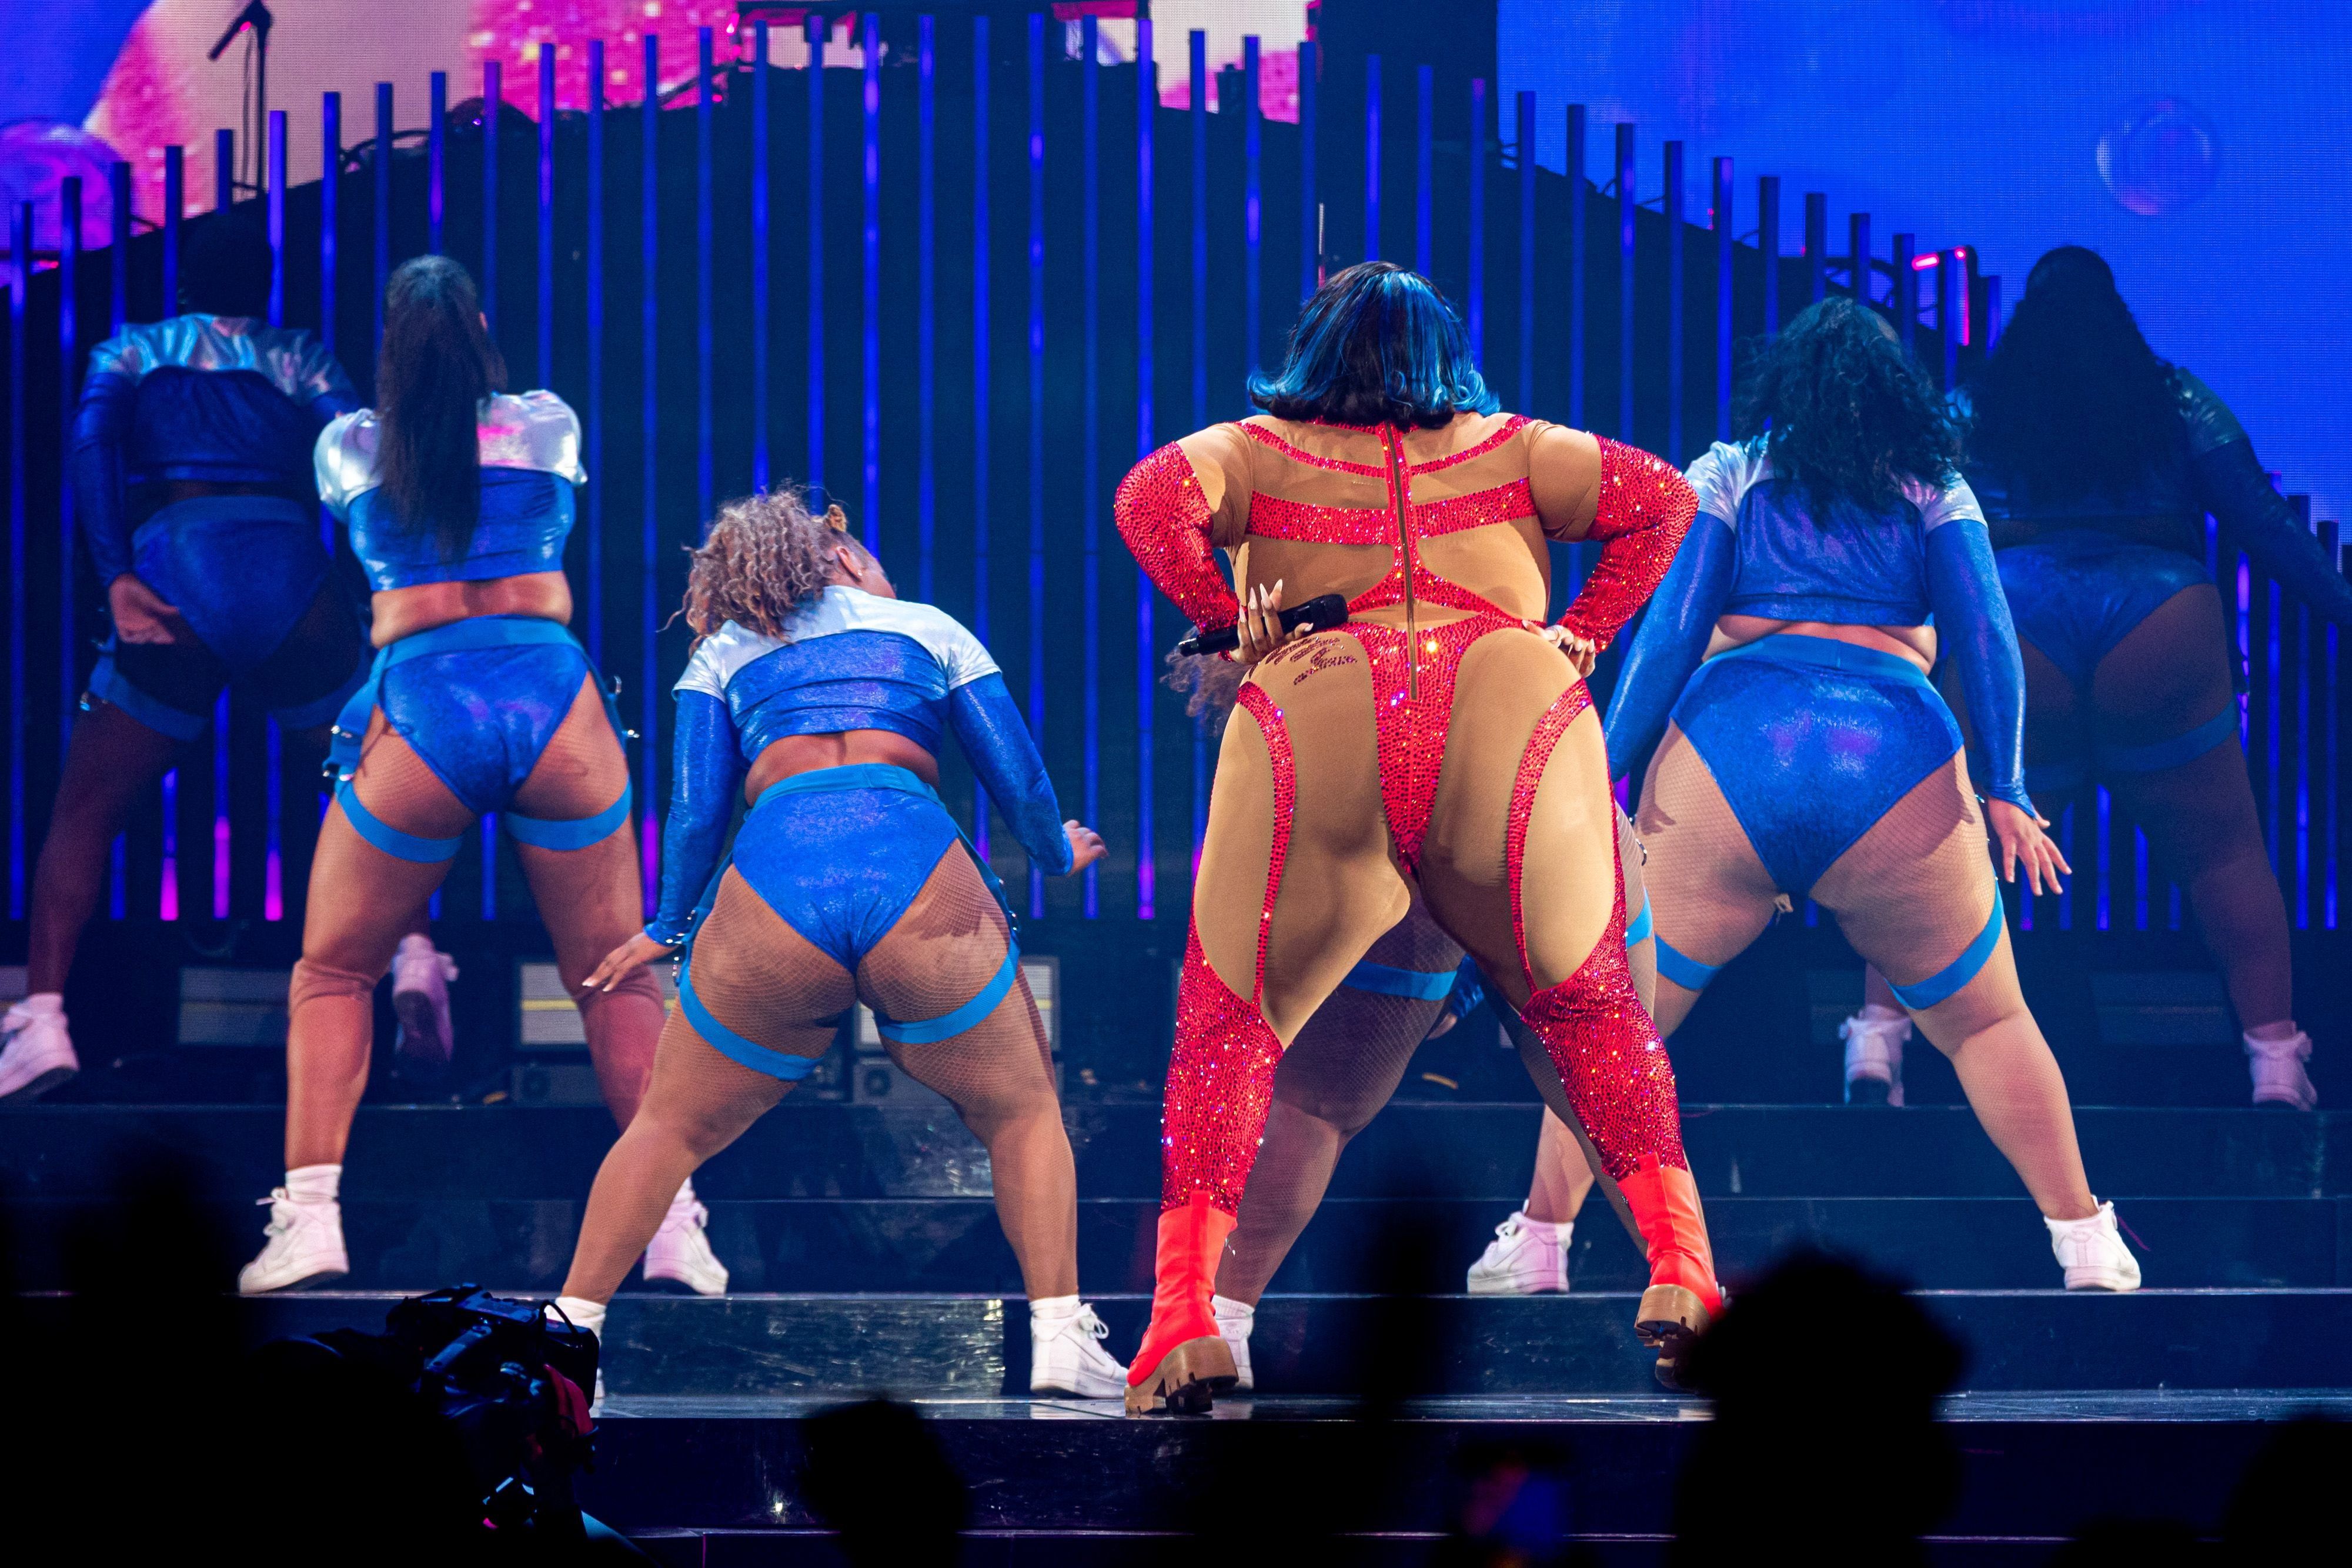 Lizzo flaunts her backside in thong underwear (photos)